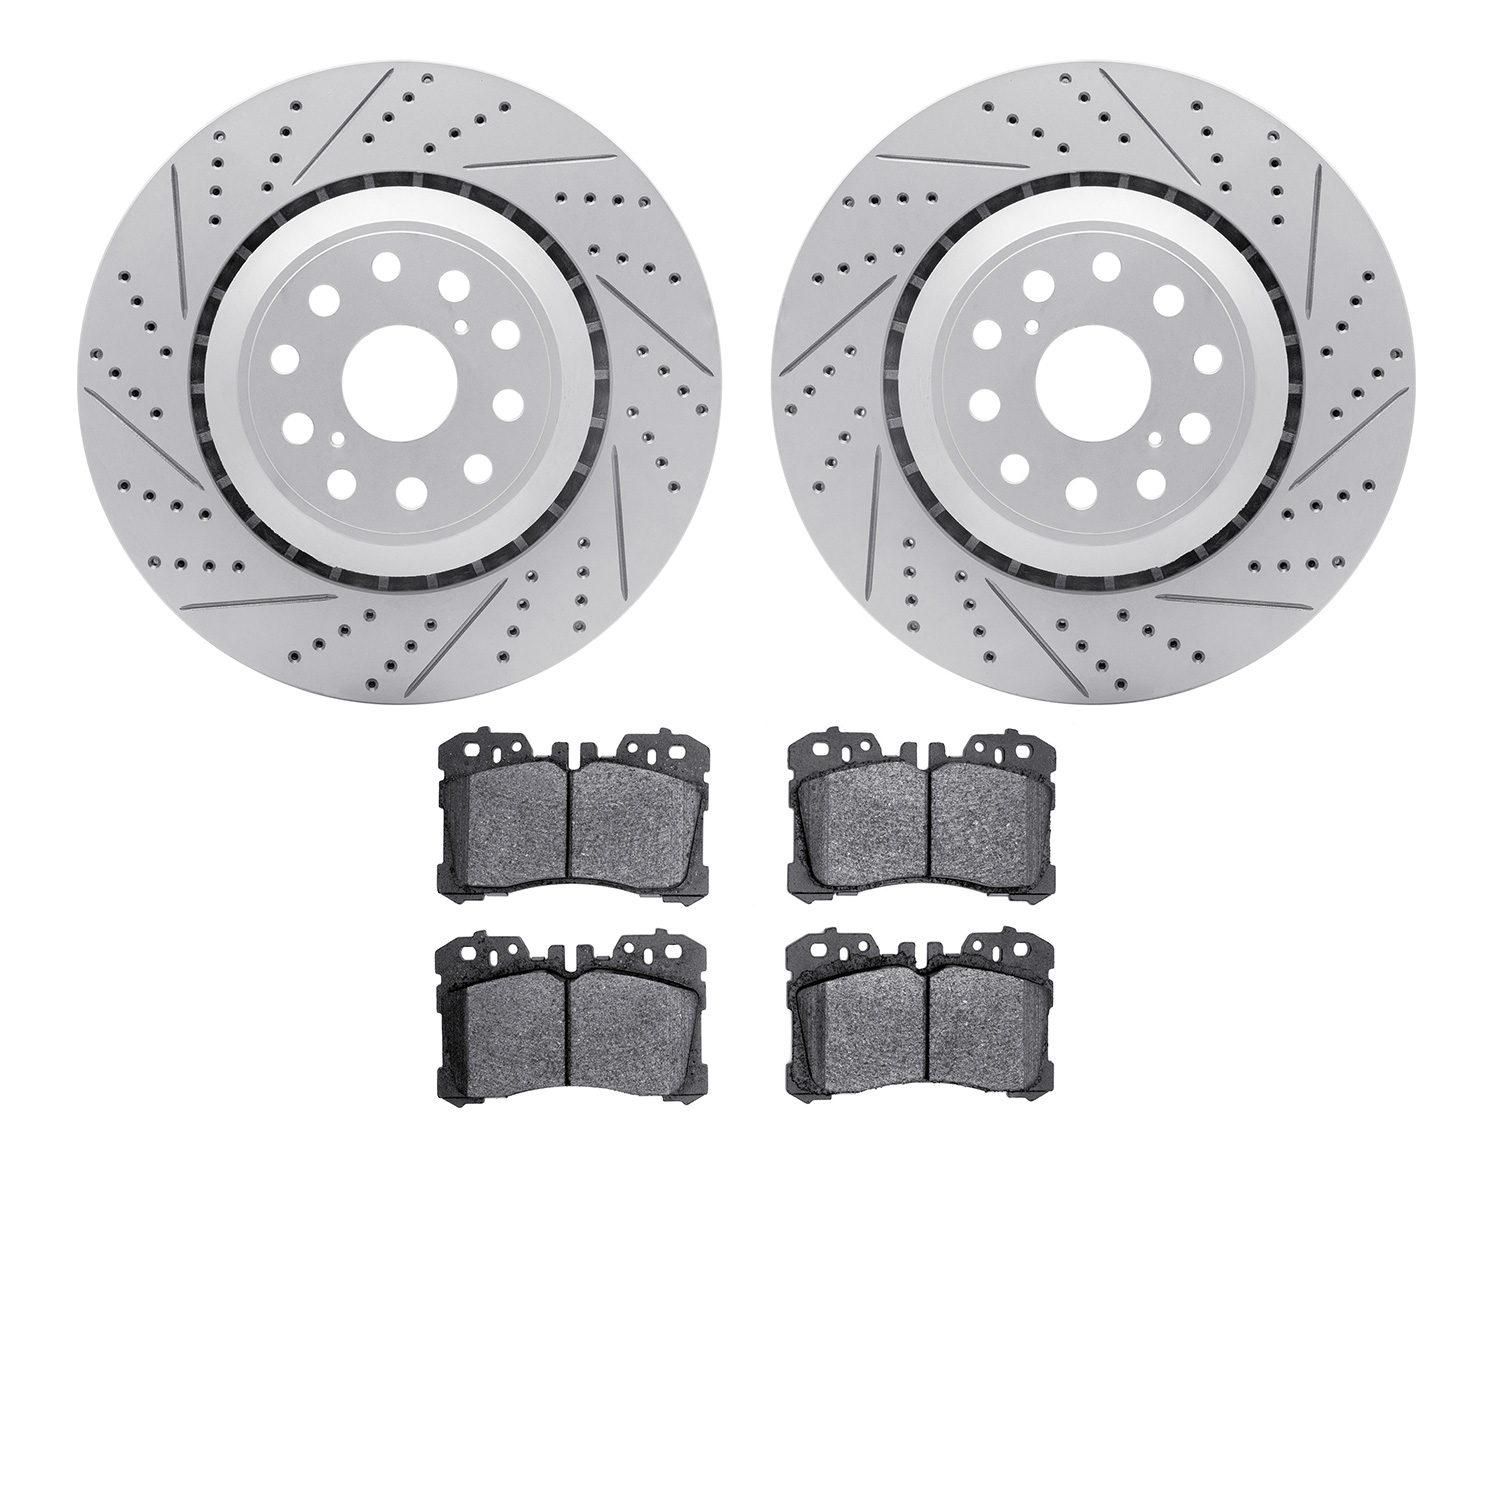 2502-75020 Geoperformance Drilled/Slotted Rotors w/5000 Advanced Brake Pads Kit, 2007-2017 Lexus/Toyota/Scion, Position: Front